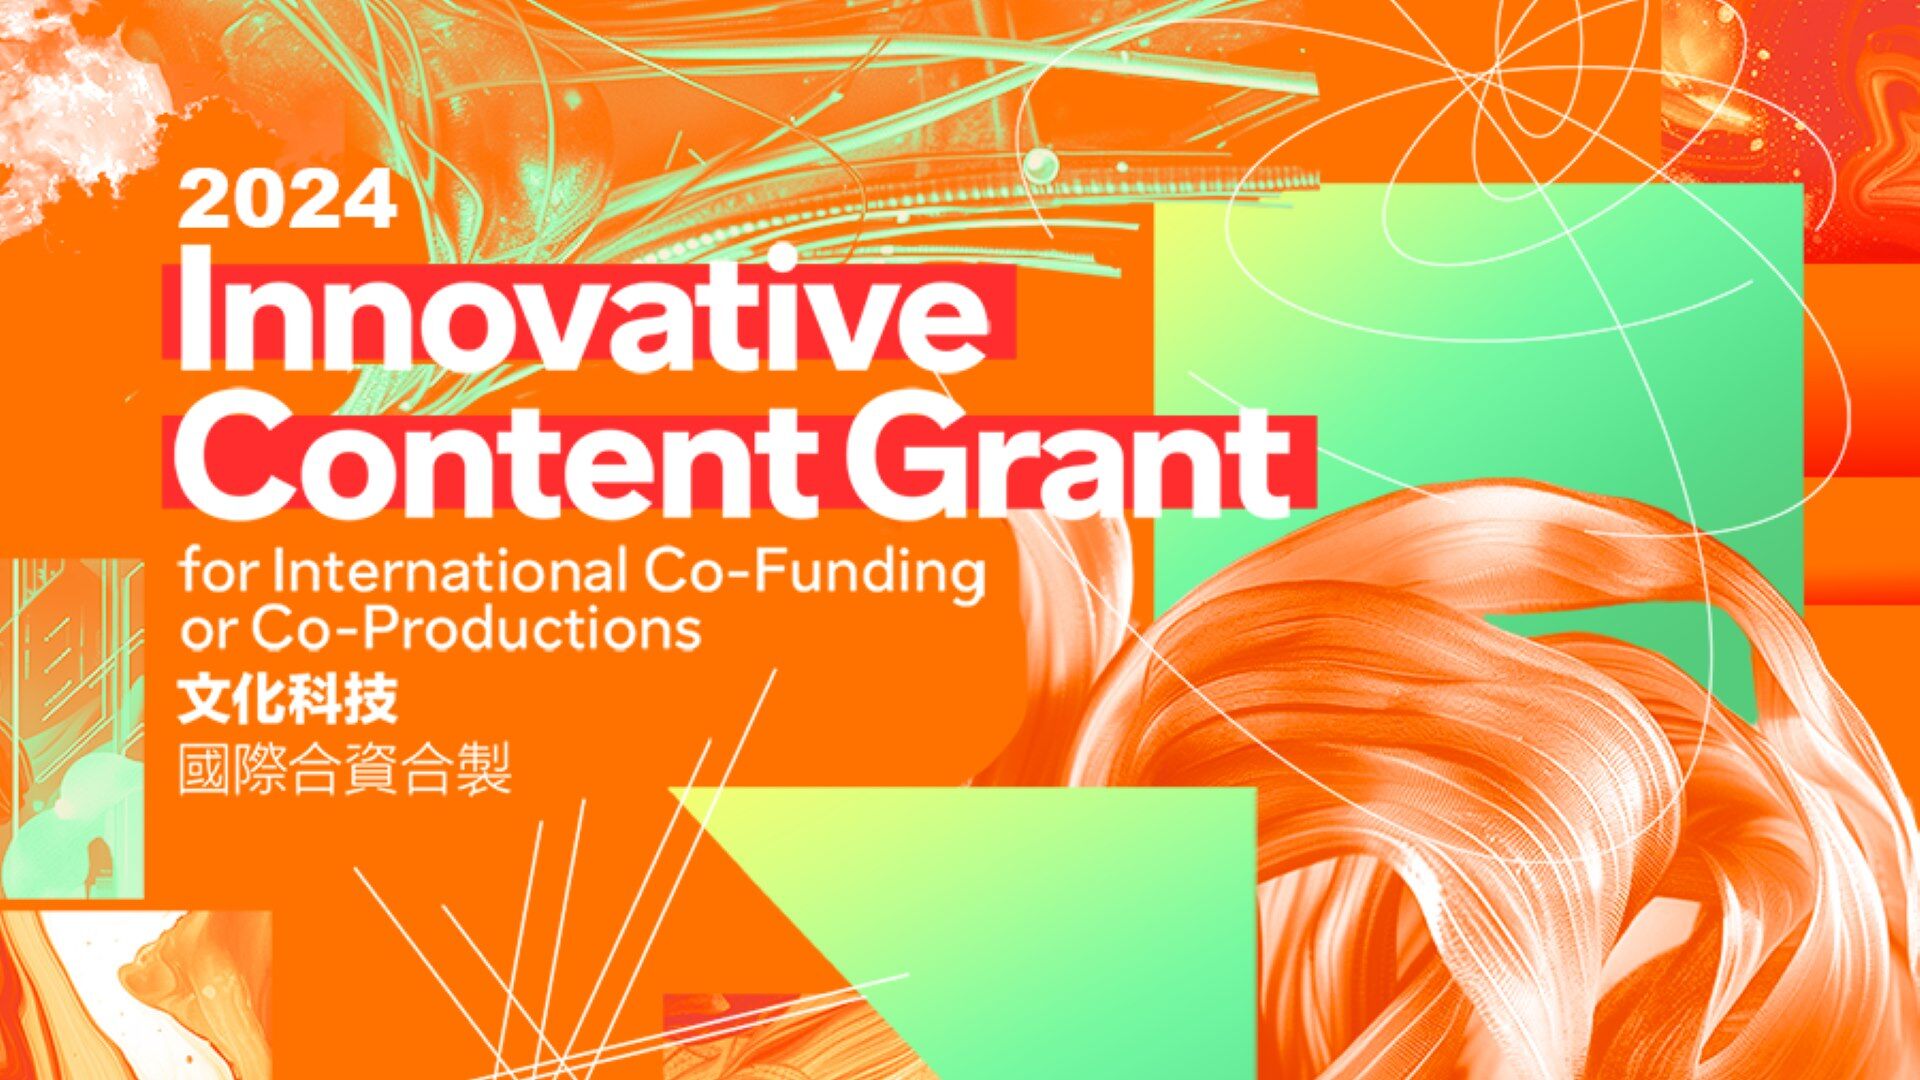 2024 Innovative Content Grant for International Co-Funding and Co-Productions is now open for application